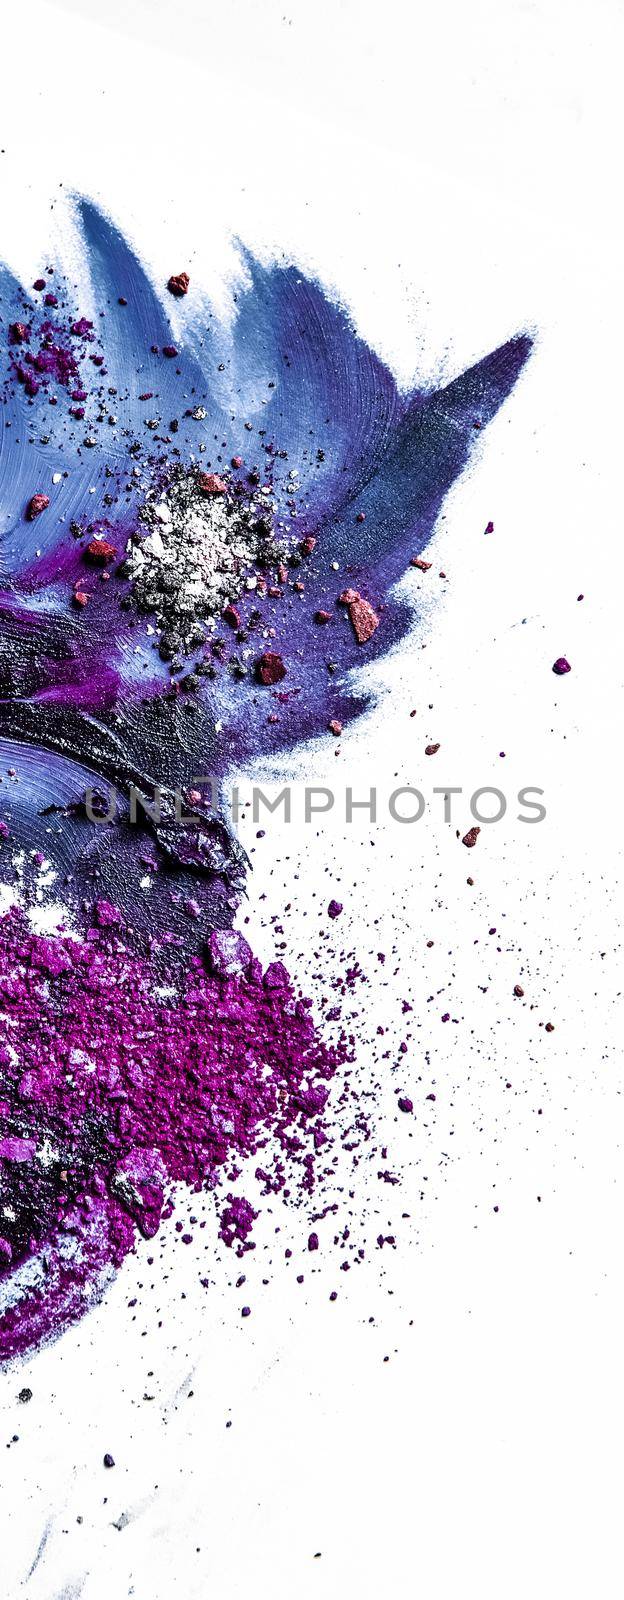 Beauty texture, cosmetic product and art of make-up concept - Artistic lipstick smudge and crushed eyeshadow as background